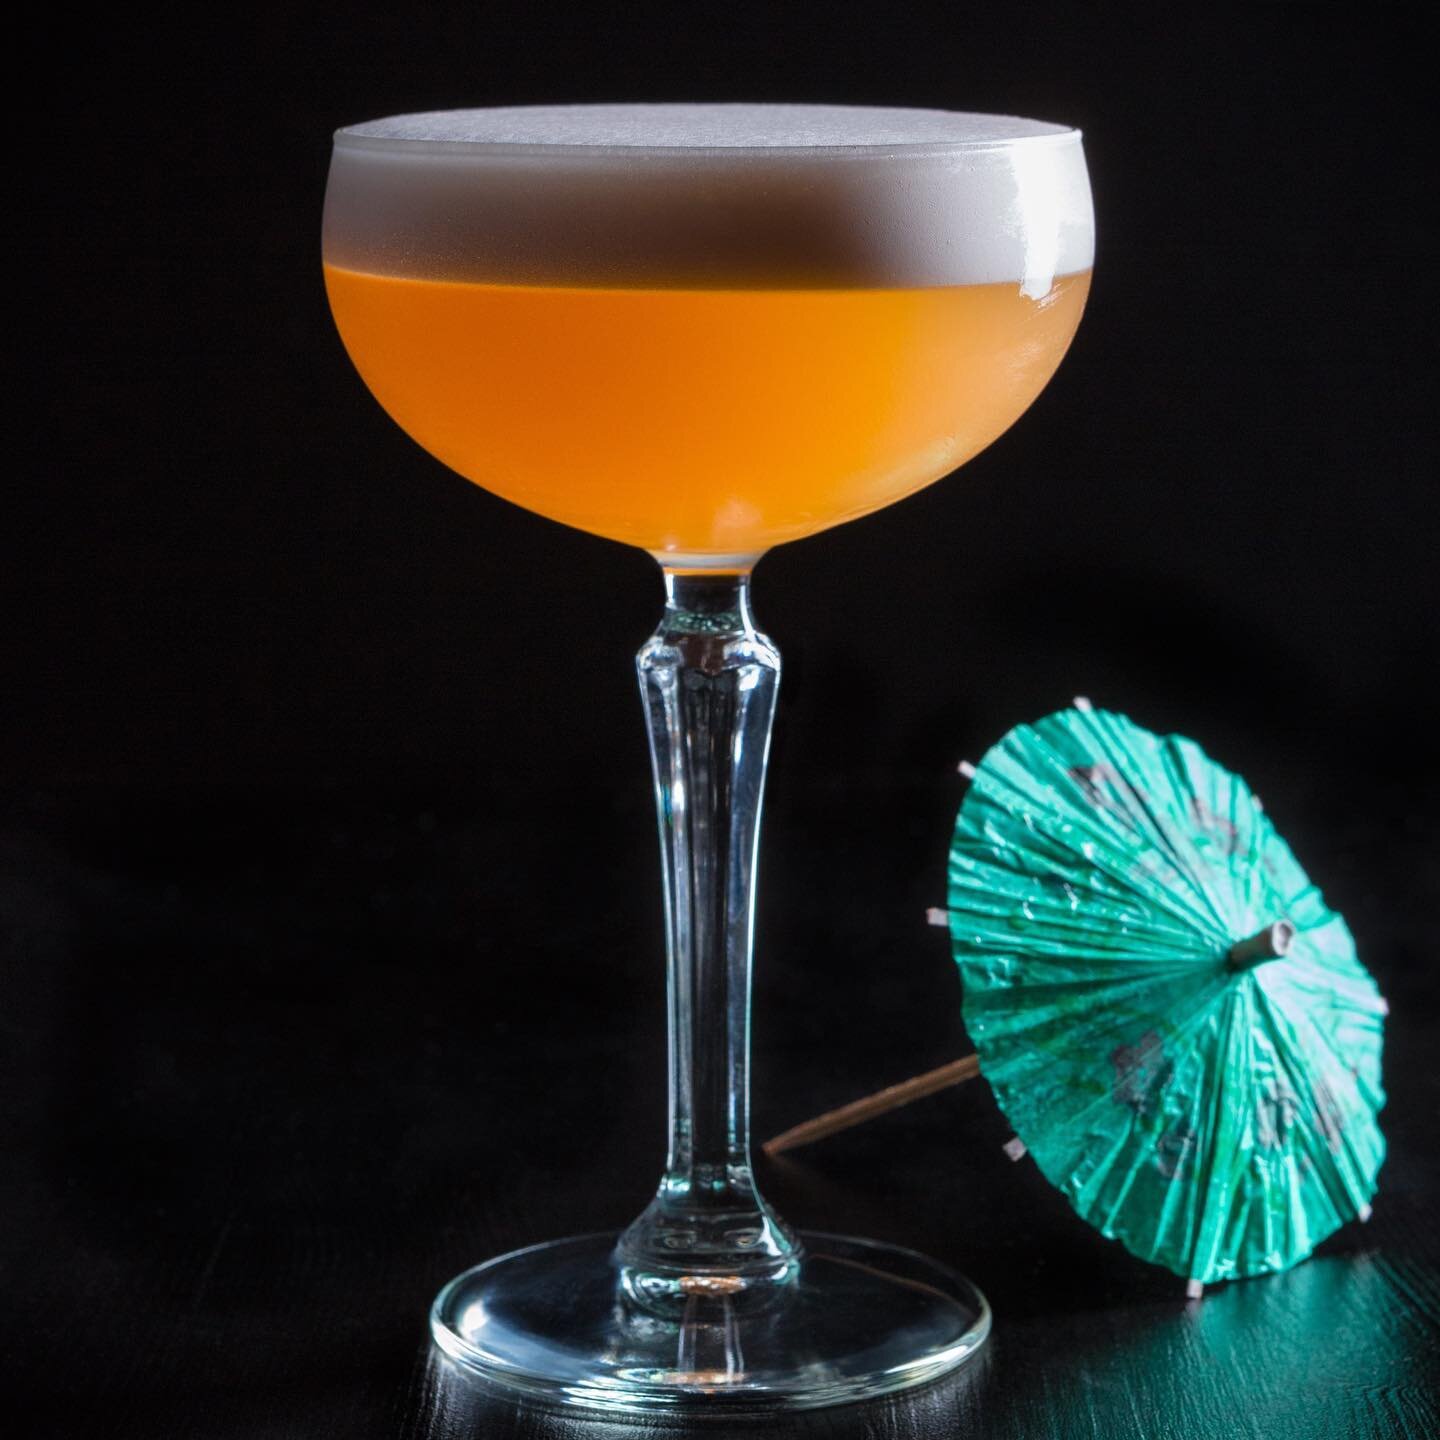 Remembering an old favourite as I approach two weeks of Dry January.

Vodka, yuzushu, pink grapefruit juice, kaffir lime syrup

Photo by @allaquiver 

#cocktails #bartender #vodka #yuzushu #geisha #umbrella #cocktailbar #japanese #japanesecocktail #f